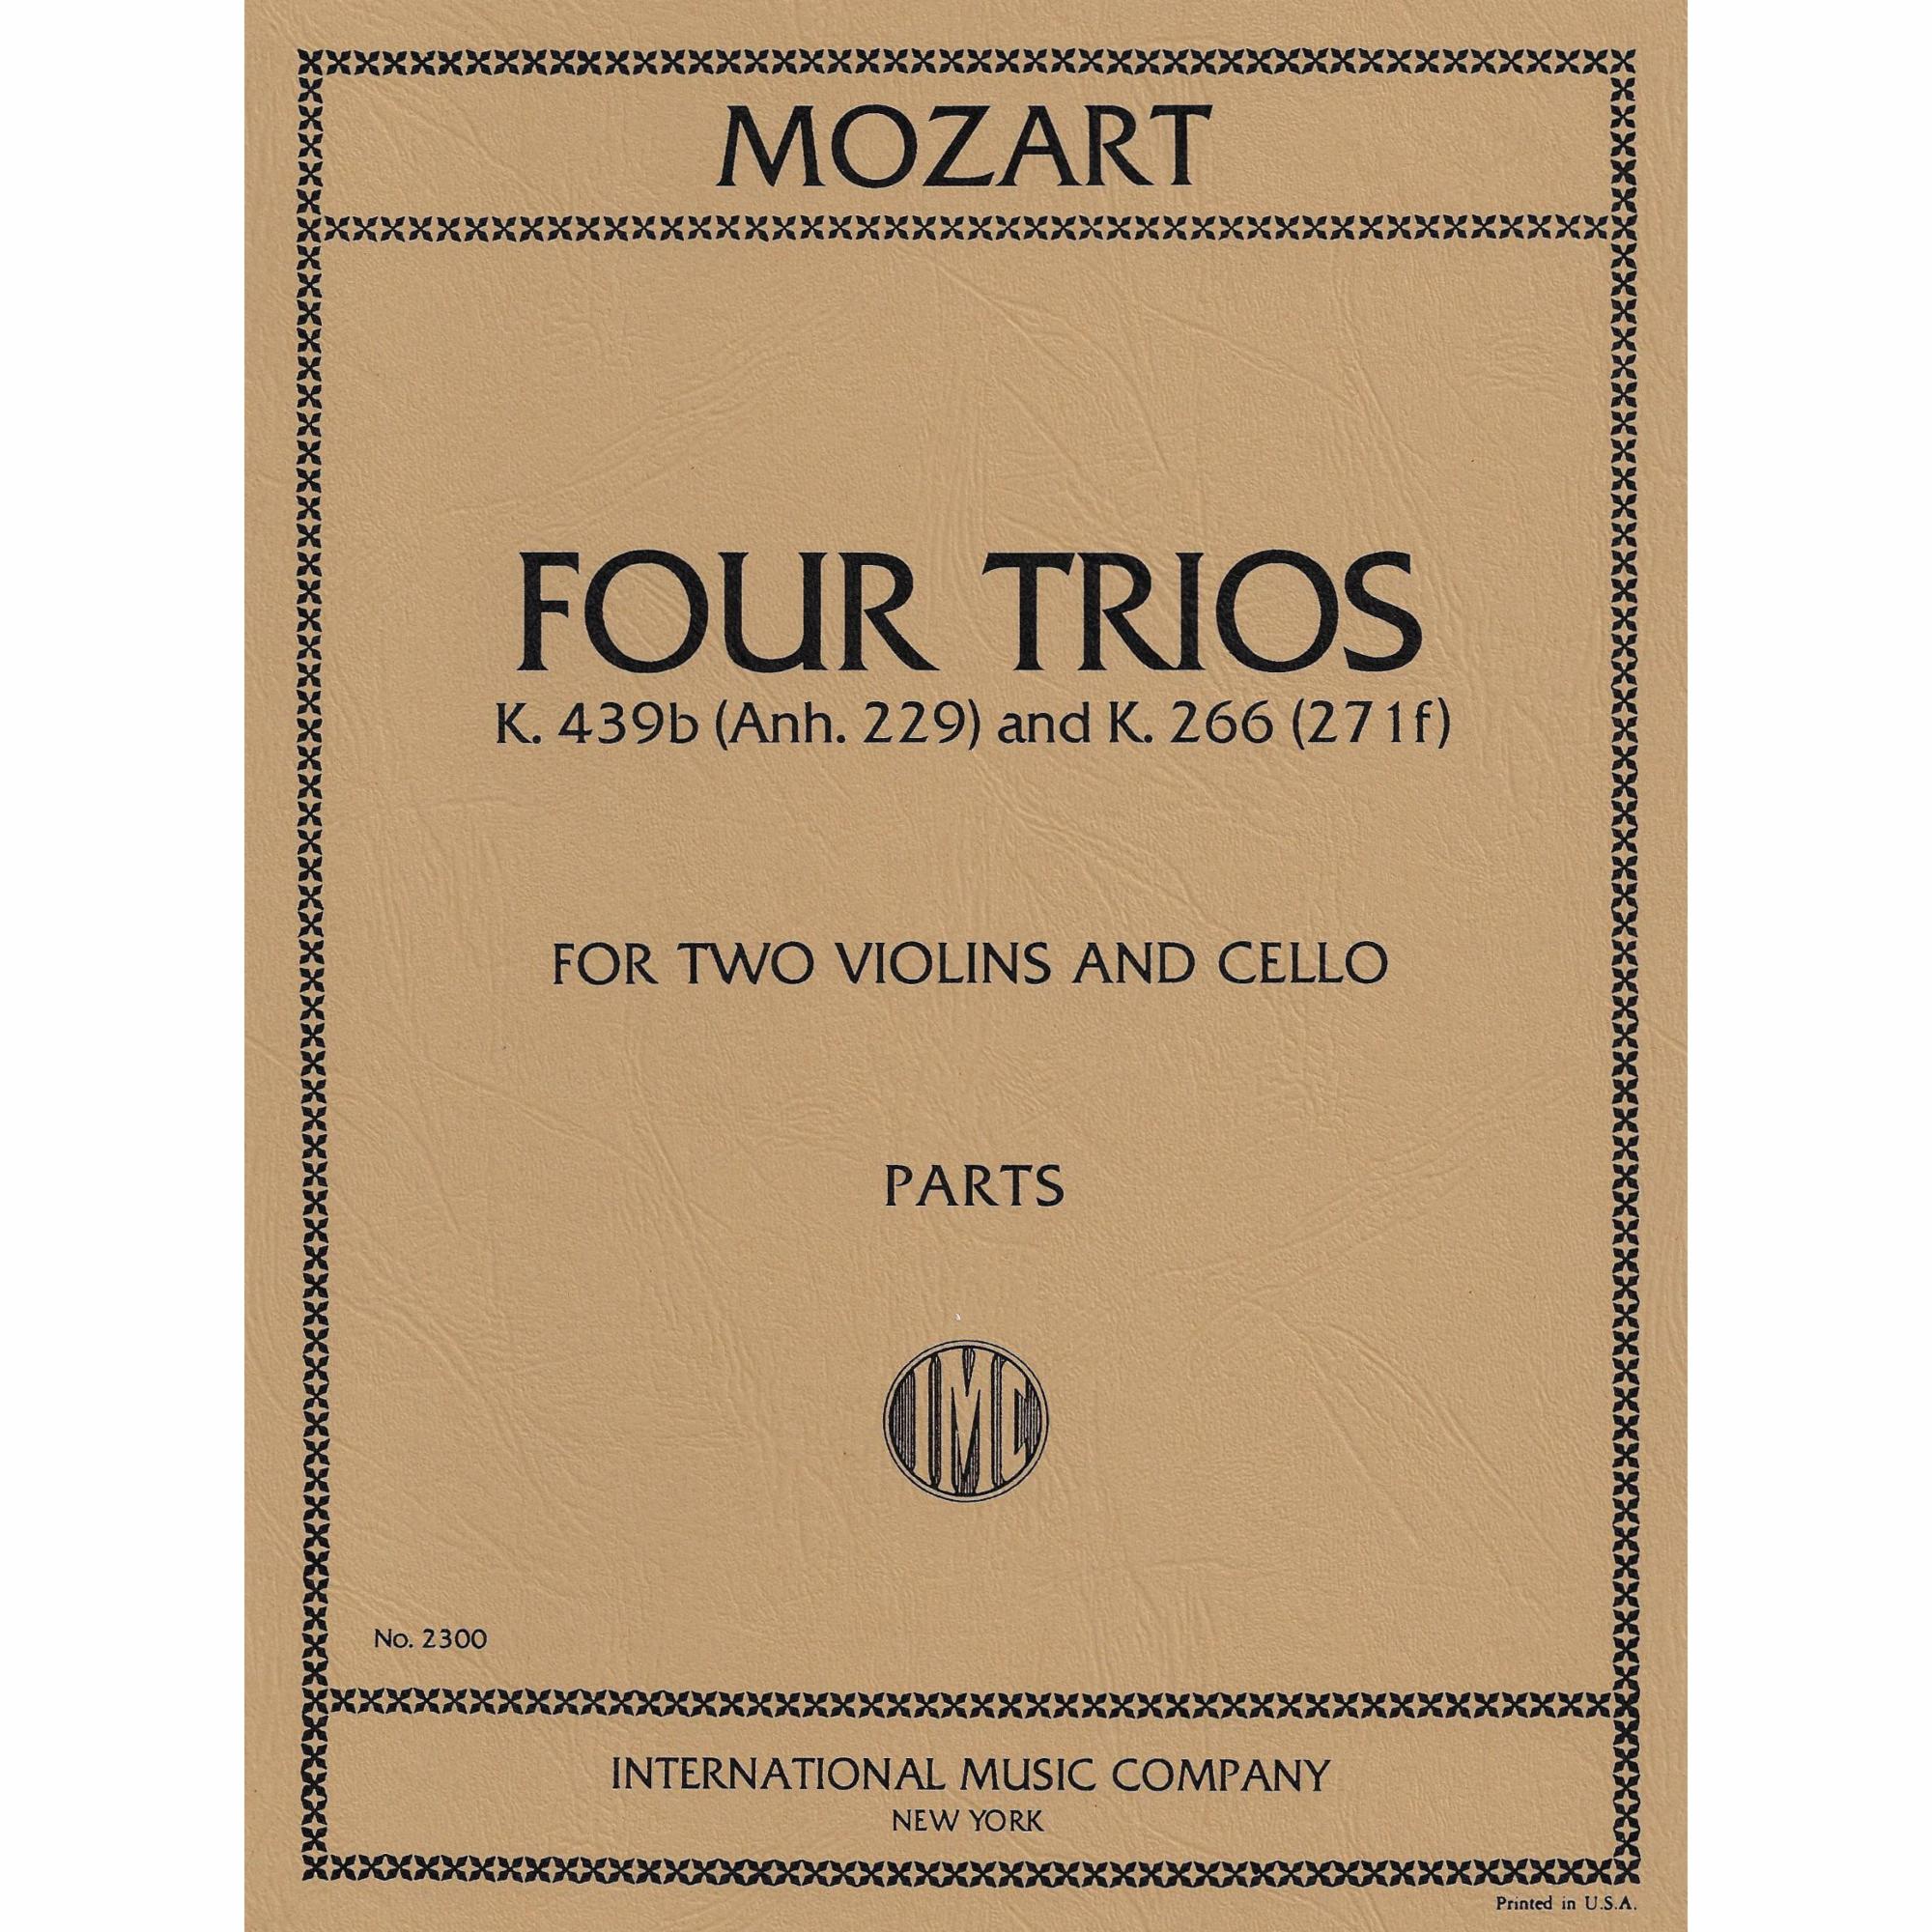 Mozart -- Four Trios, K. 439b & K. 266 for Two Violins and Cello